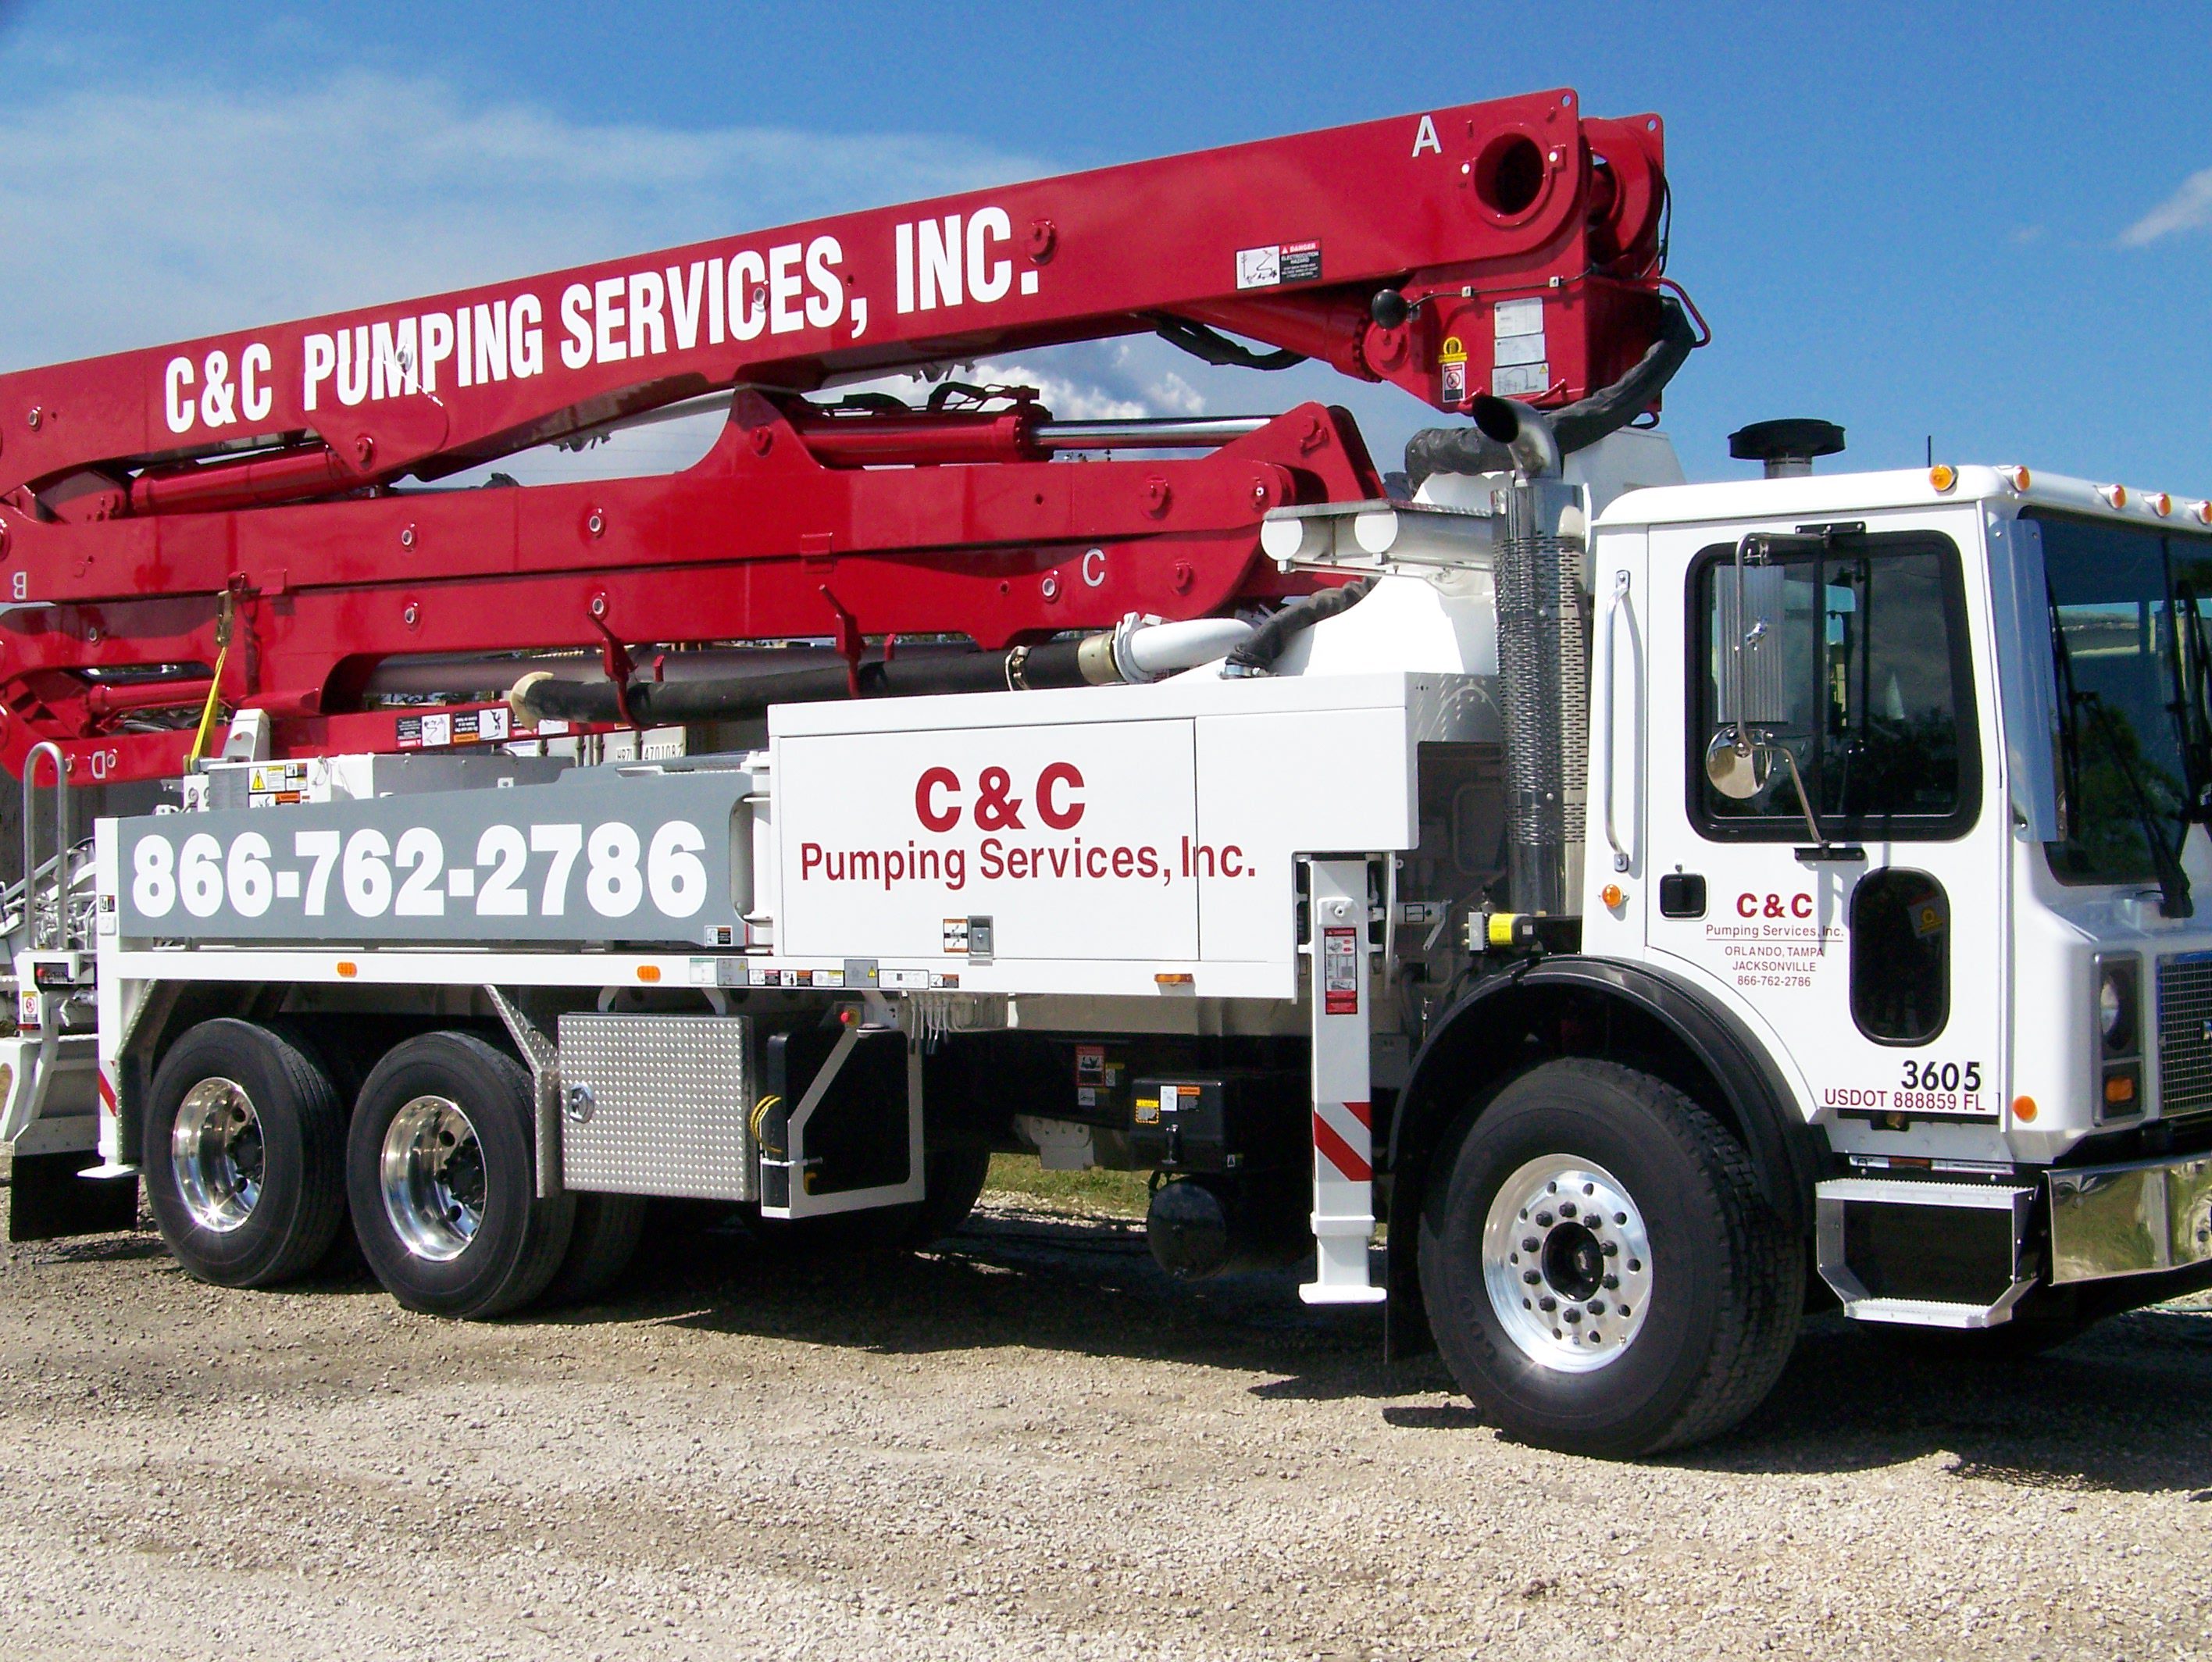 36 Meter concrete boom pump, provided by C&C Pumping Services Inc. 